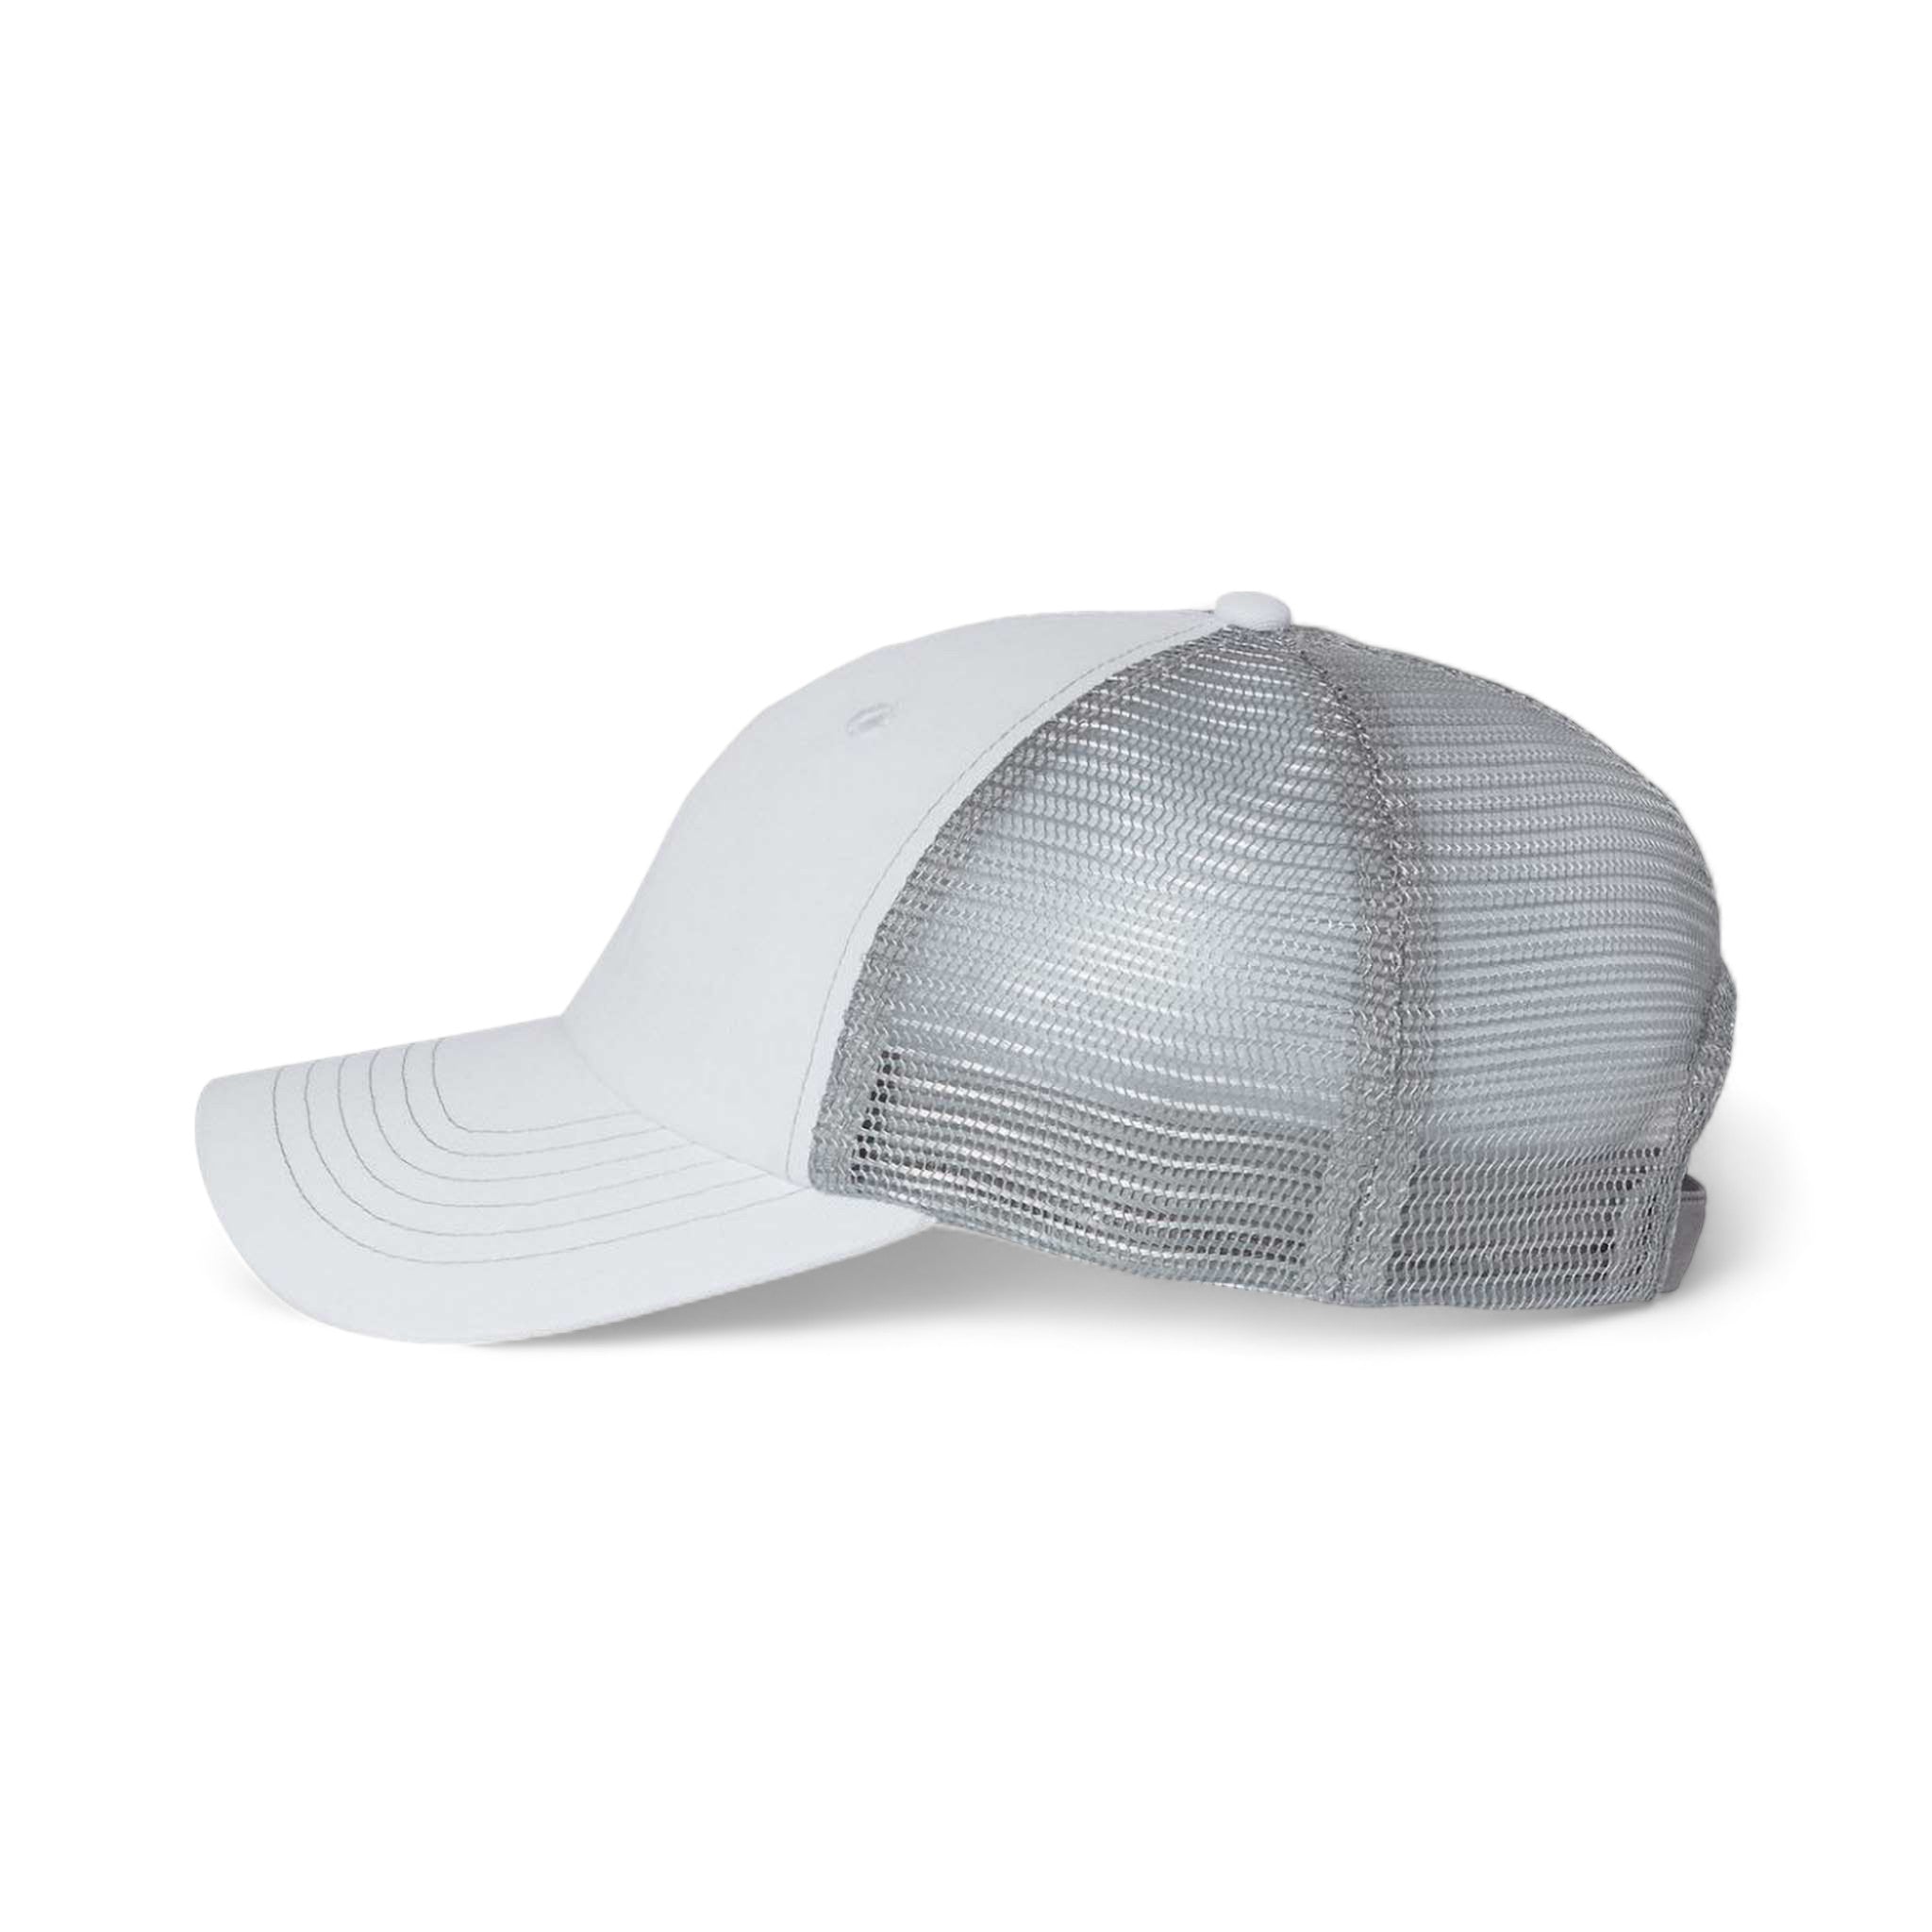 Side view of Sportsman 3100 custom hat in white and grey